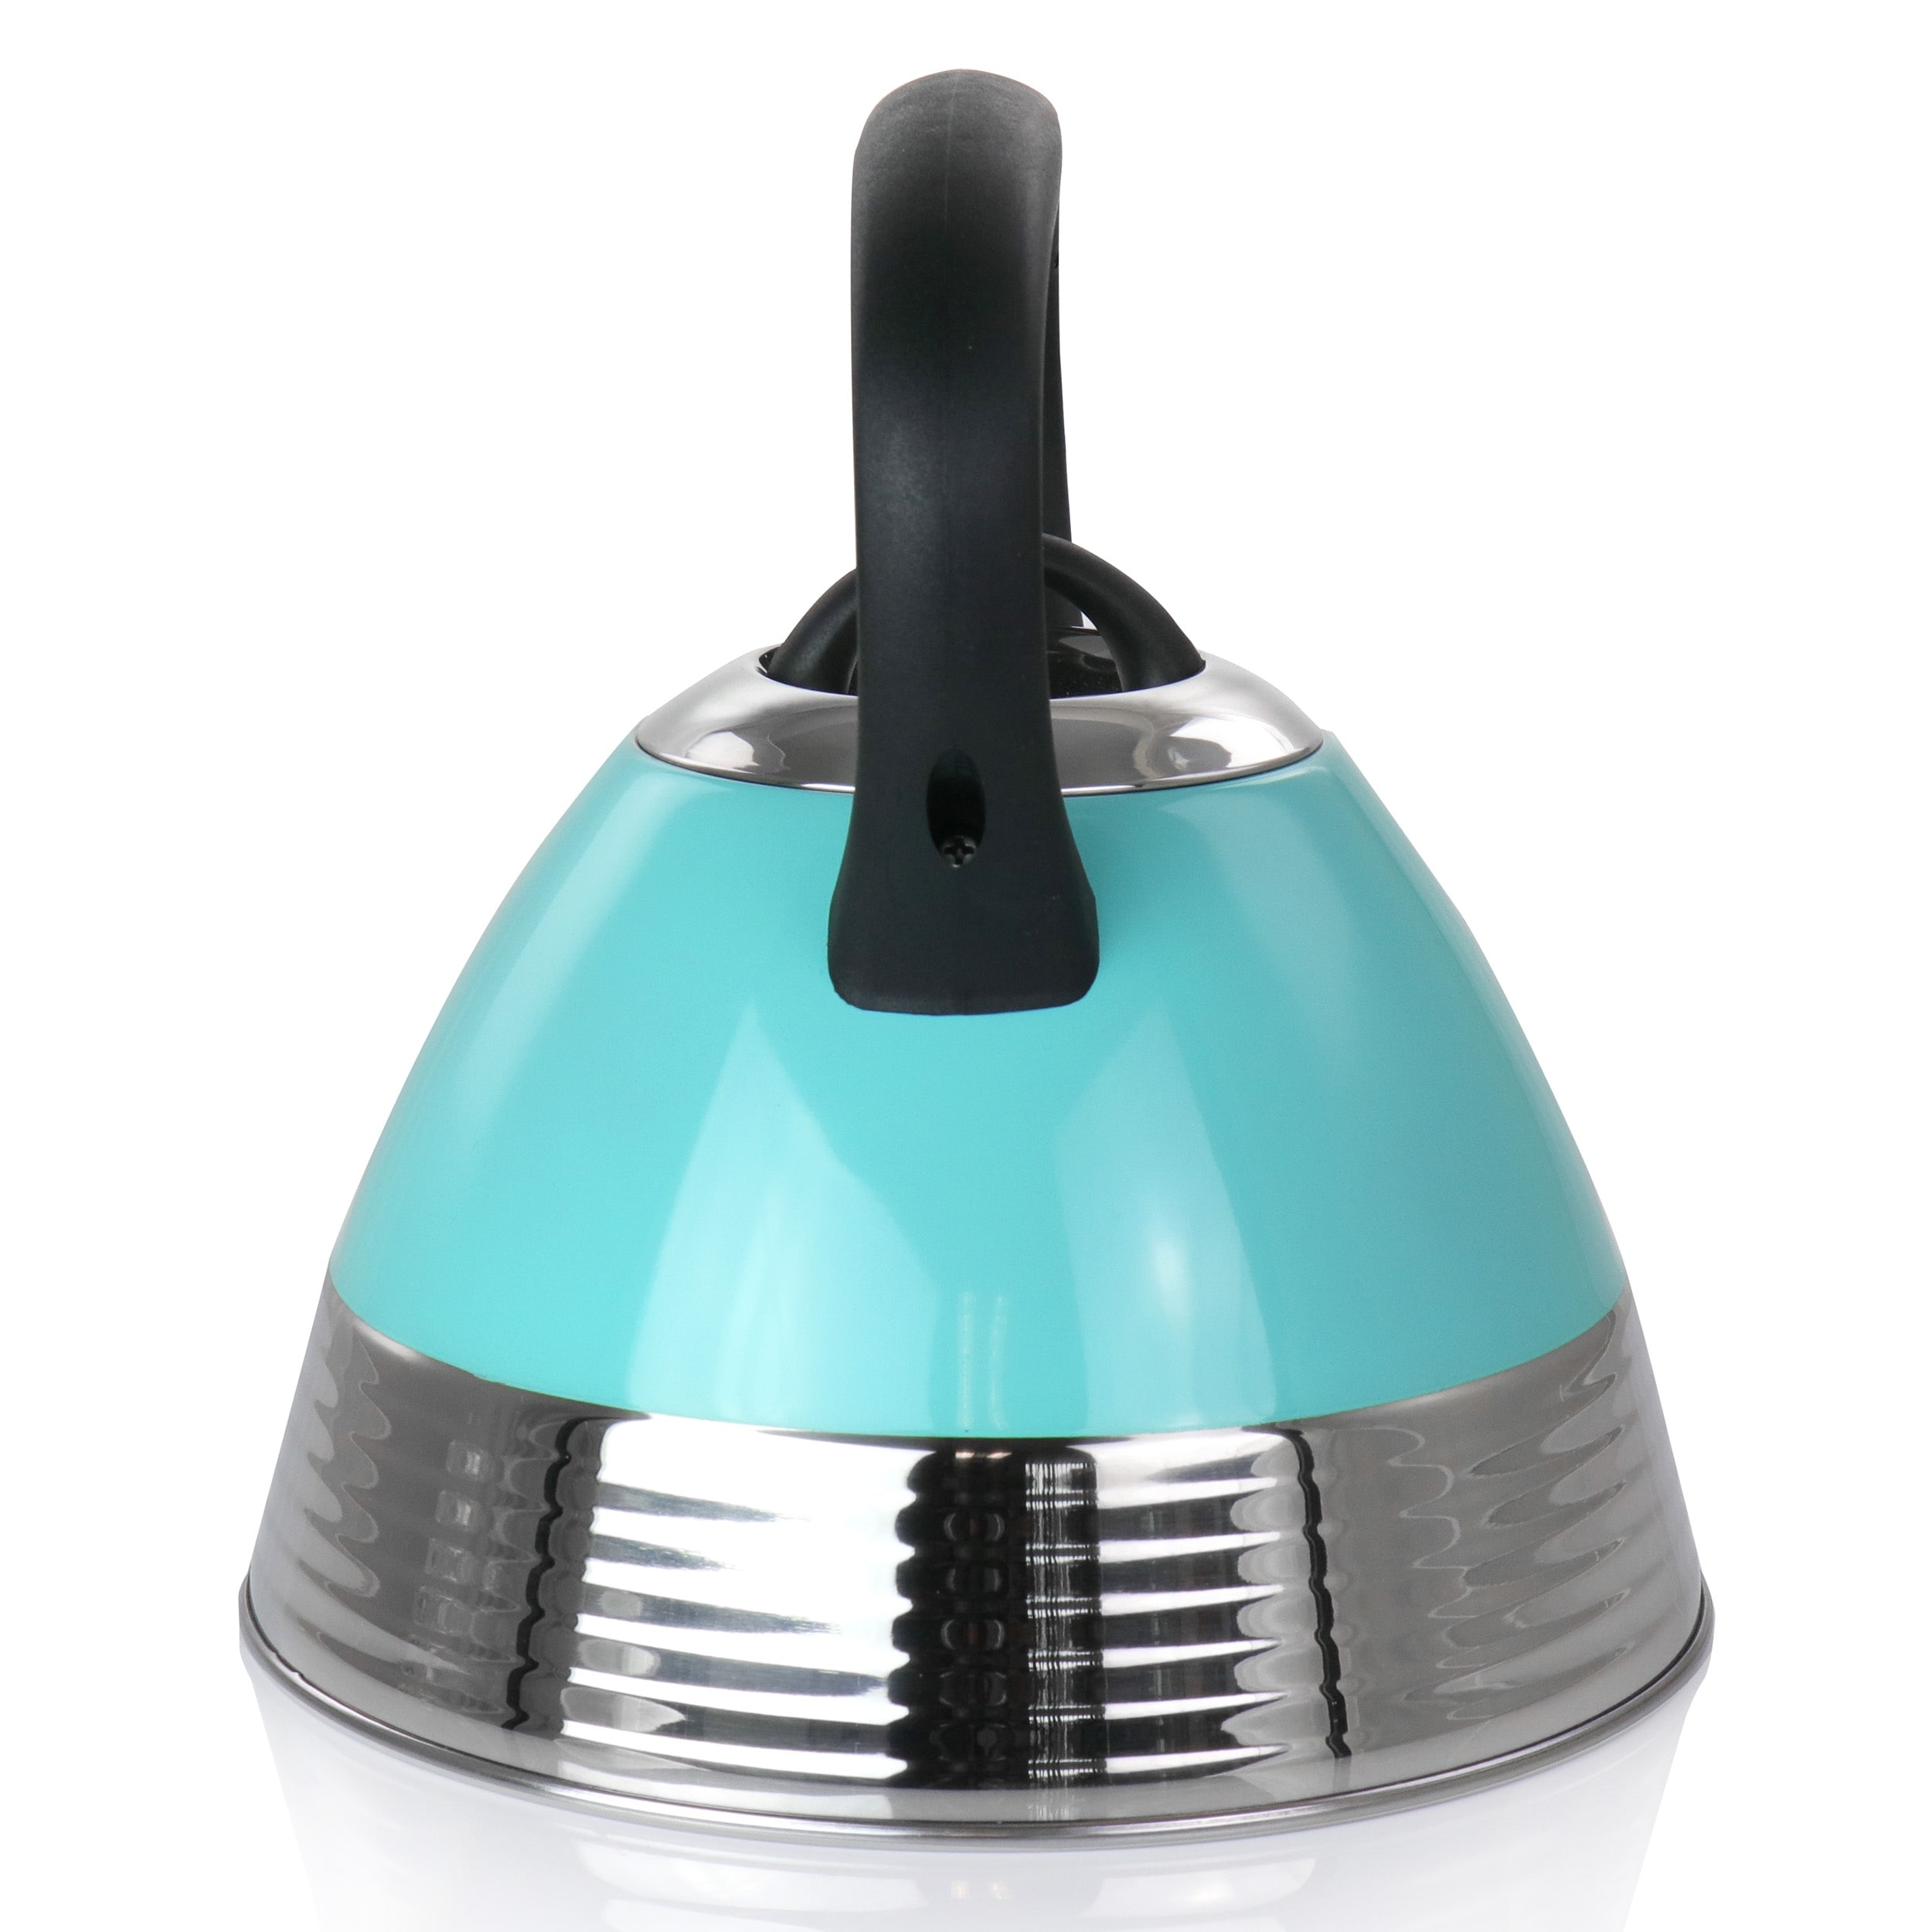 Circulon Enamel on Steel 2-Qt. Whistling Teakettle with Flip-Up Spout - Turquoise